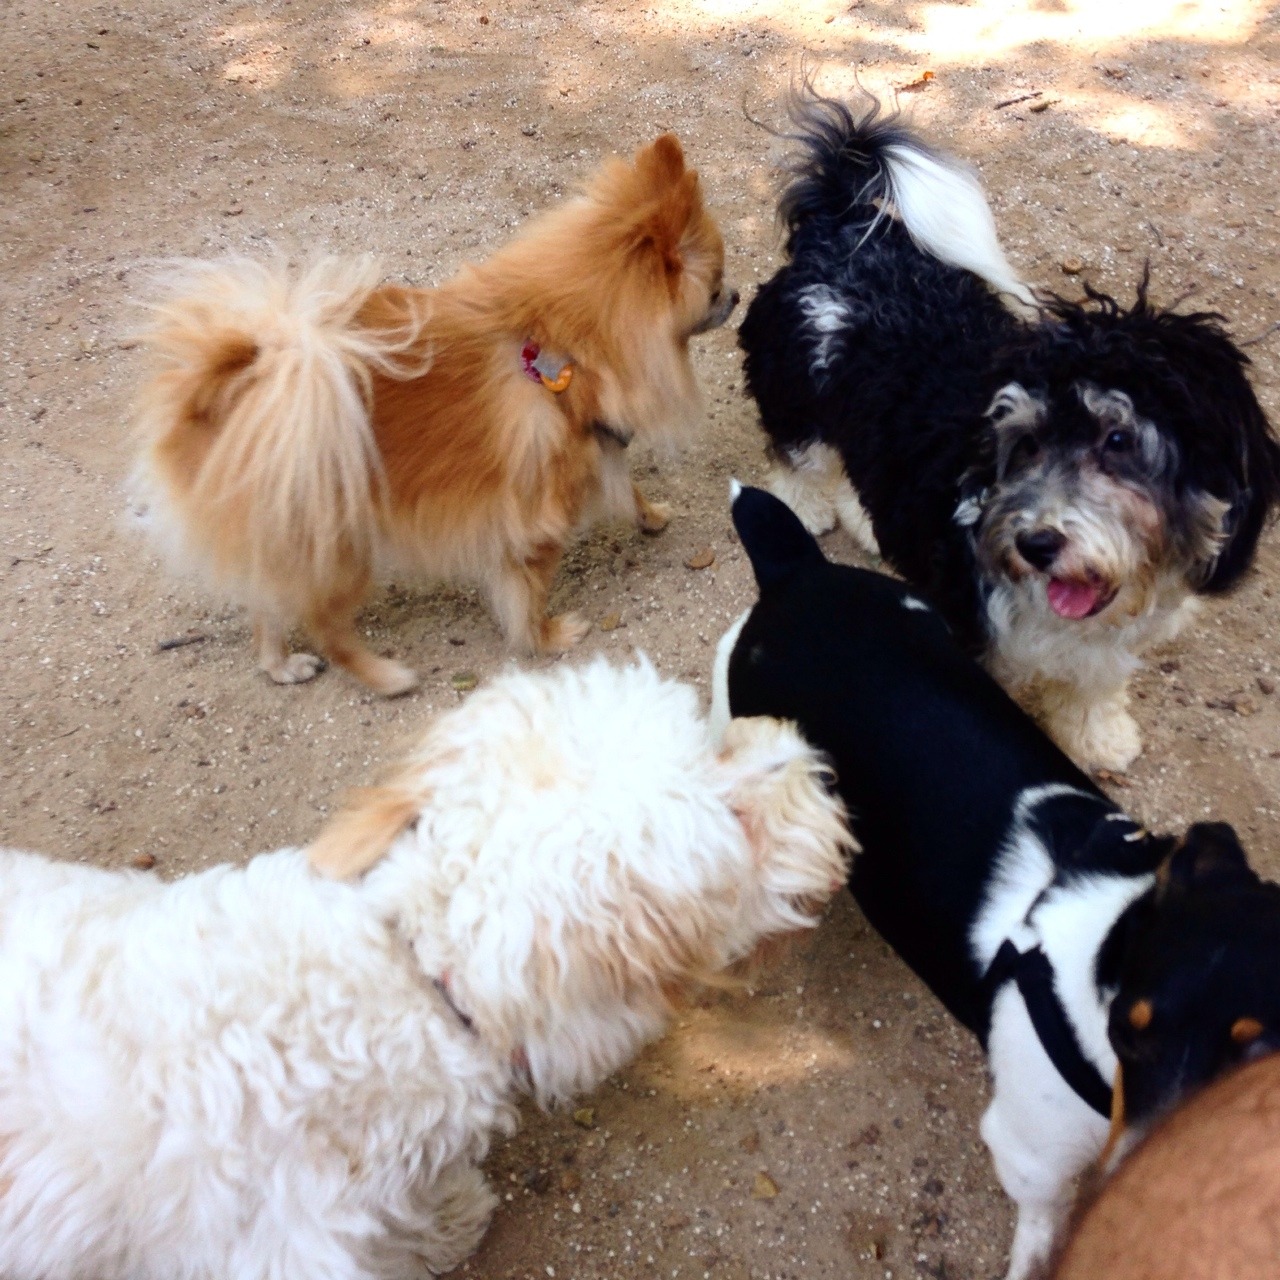 chickennuggetwastaken:
“Oh hai my new doggy friends.
”
Inappropriate, Nugget!!